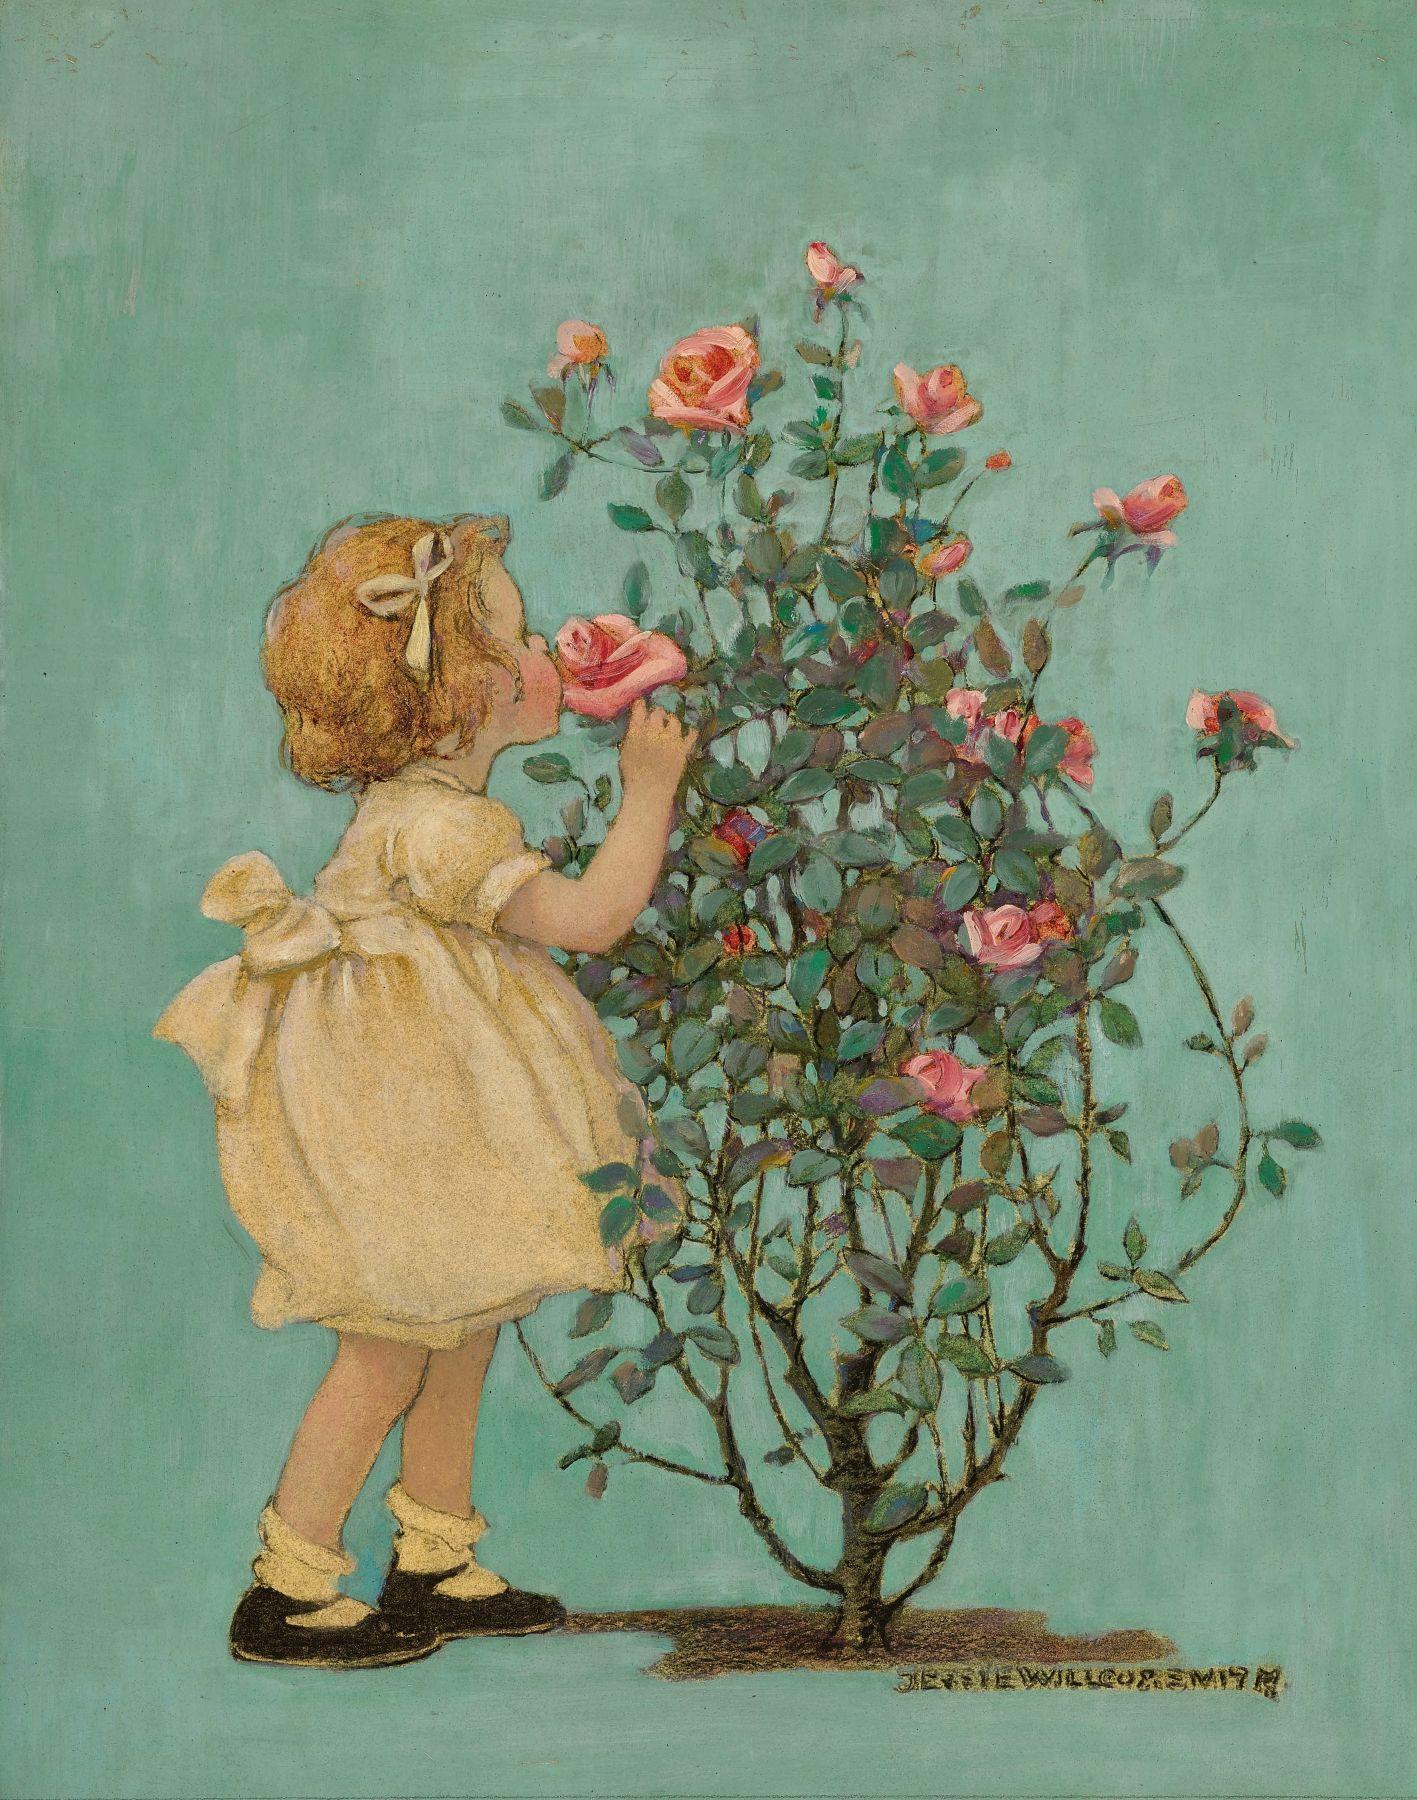 Jessie Willcox Smith Figurative Art - A Rose by Any Other Name